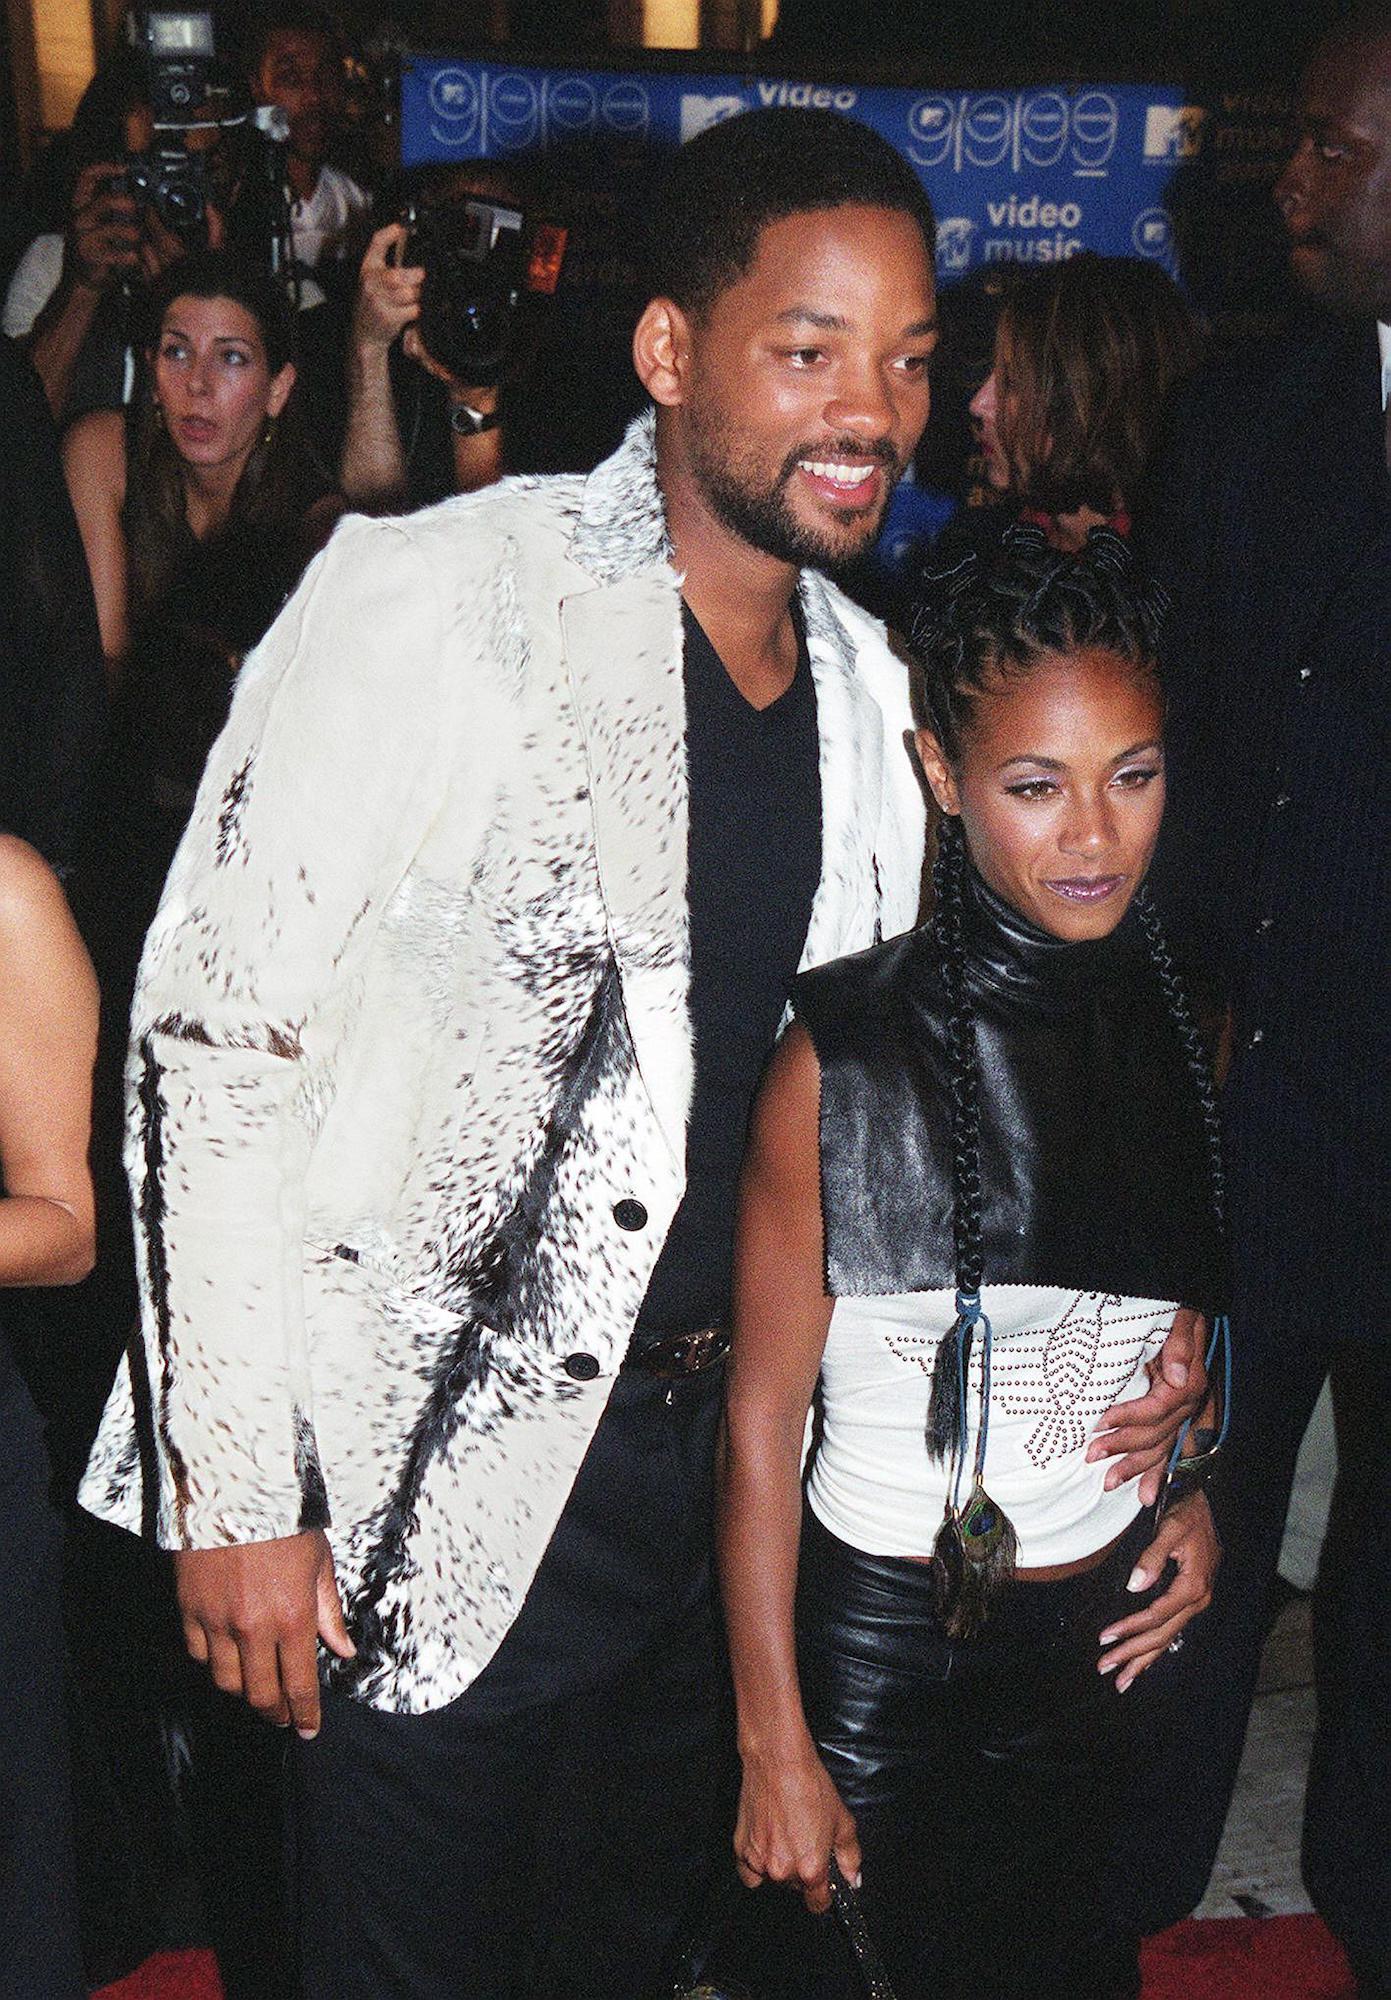 Will Smith and Jada Pinkett Smith arrive for the arrive for the MTV Video Music Awards in 1999